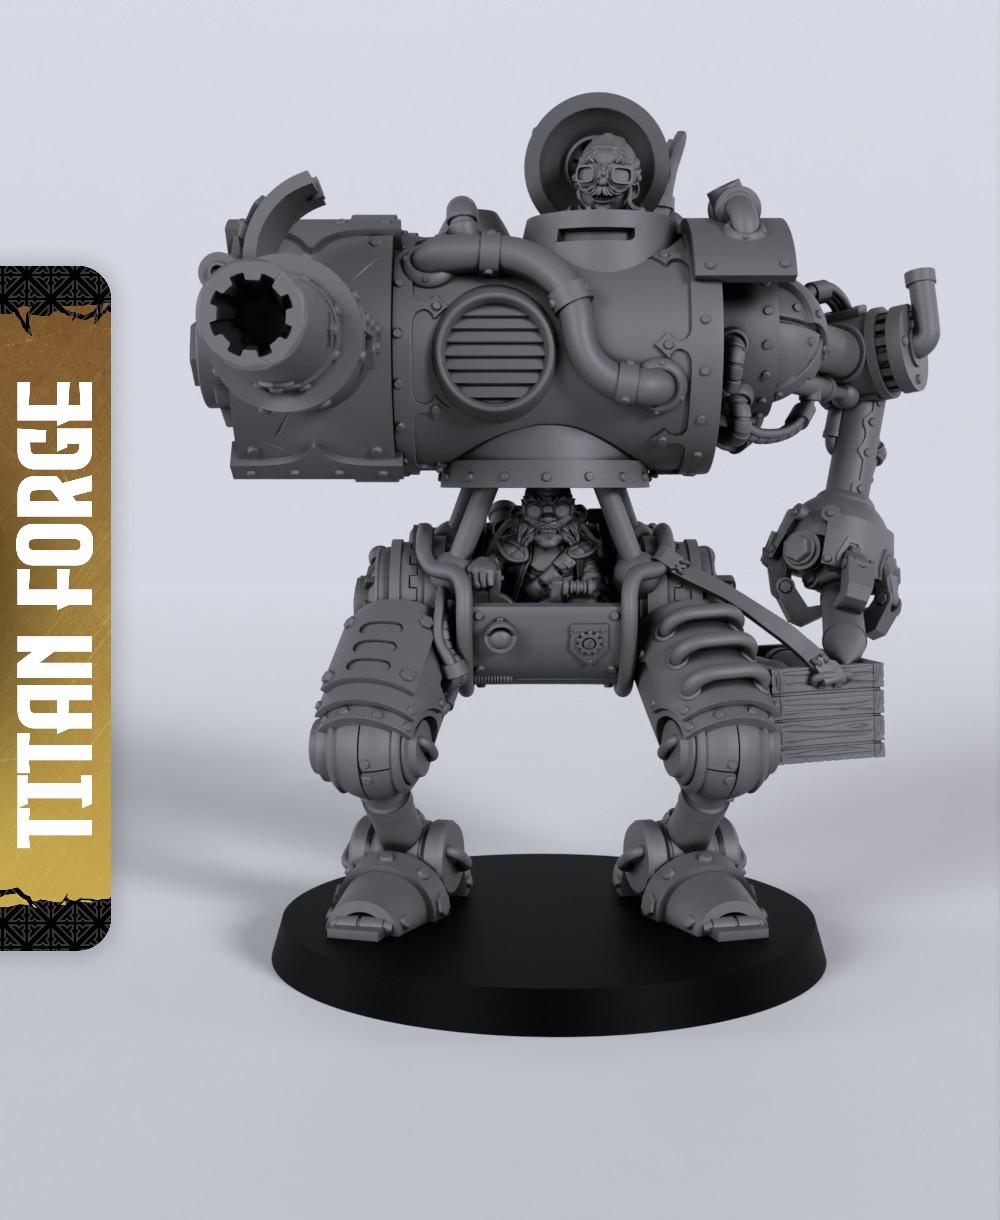 Hero Mech - With Free Dragon Warhammer - 5e DnD Inspired for RPG and Wargamers 3d model